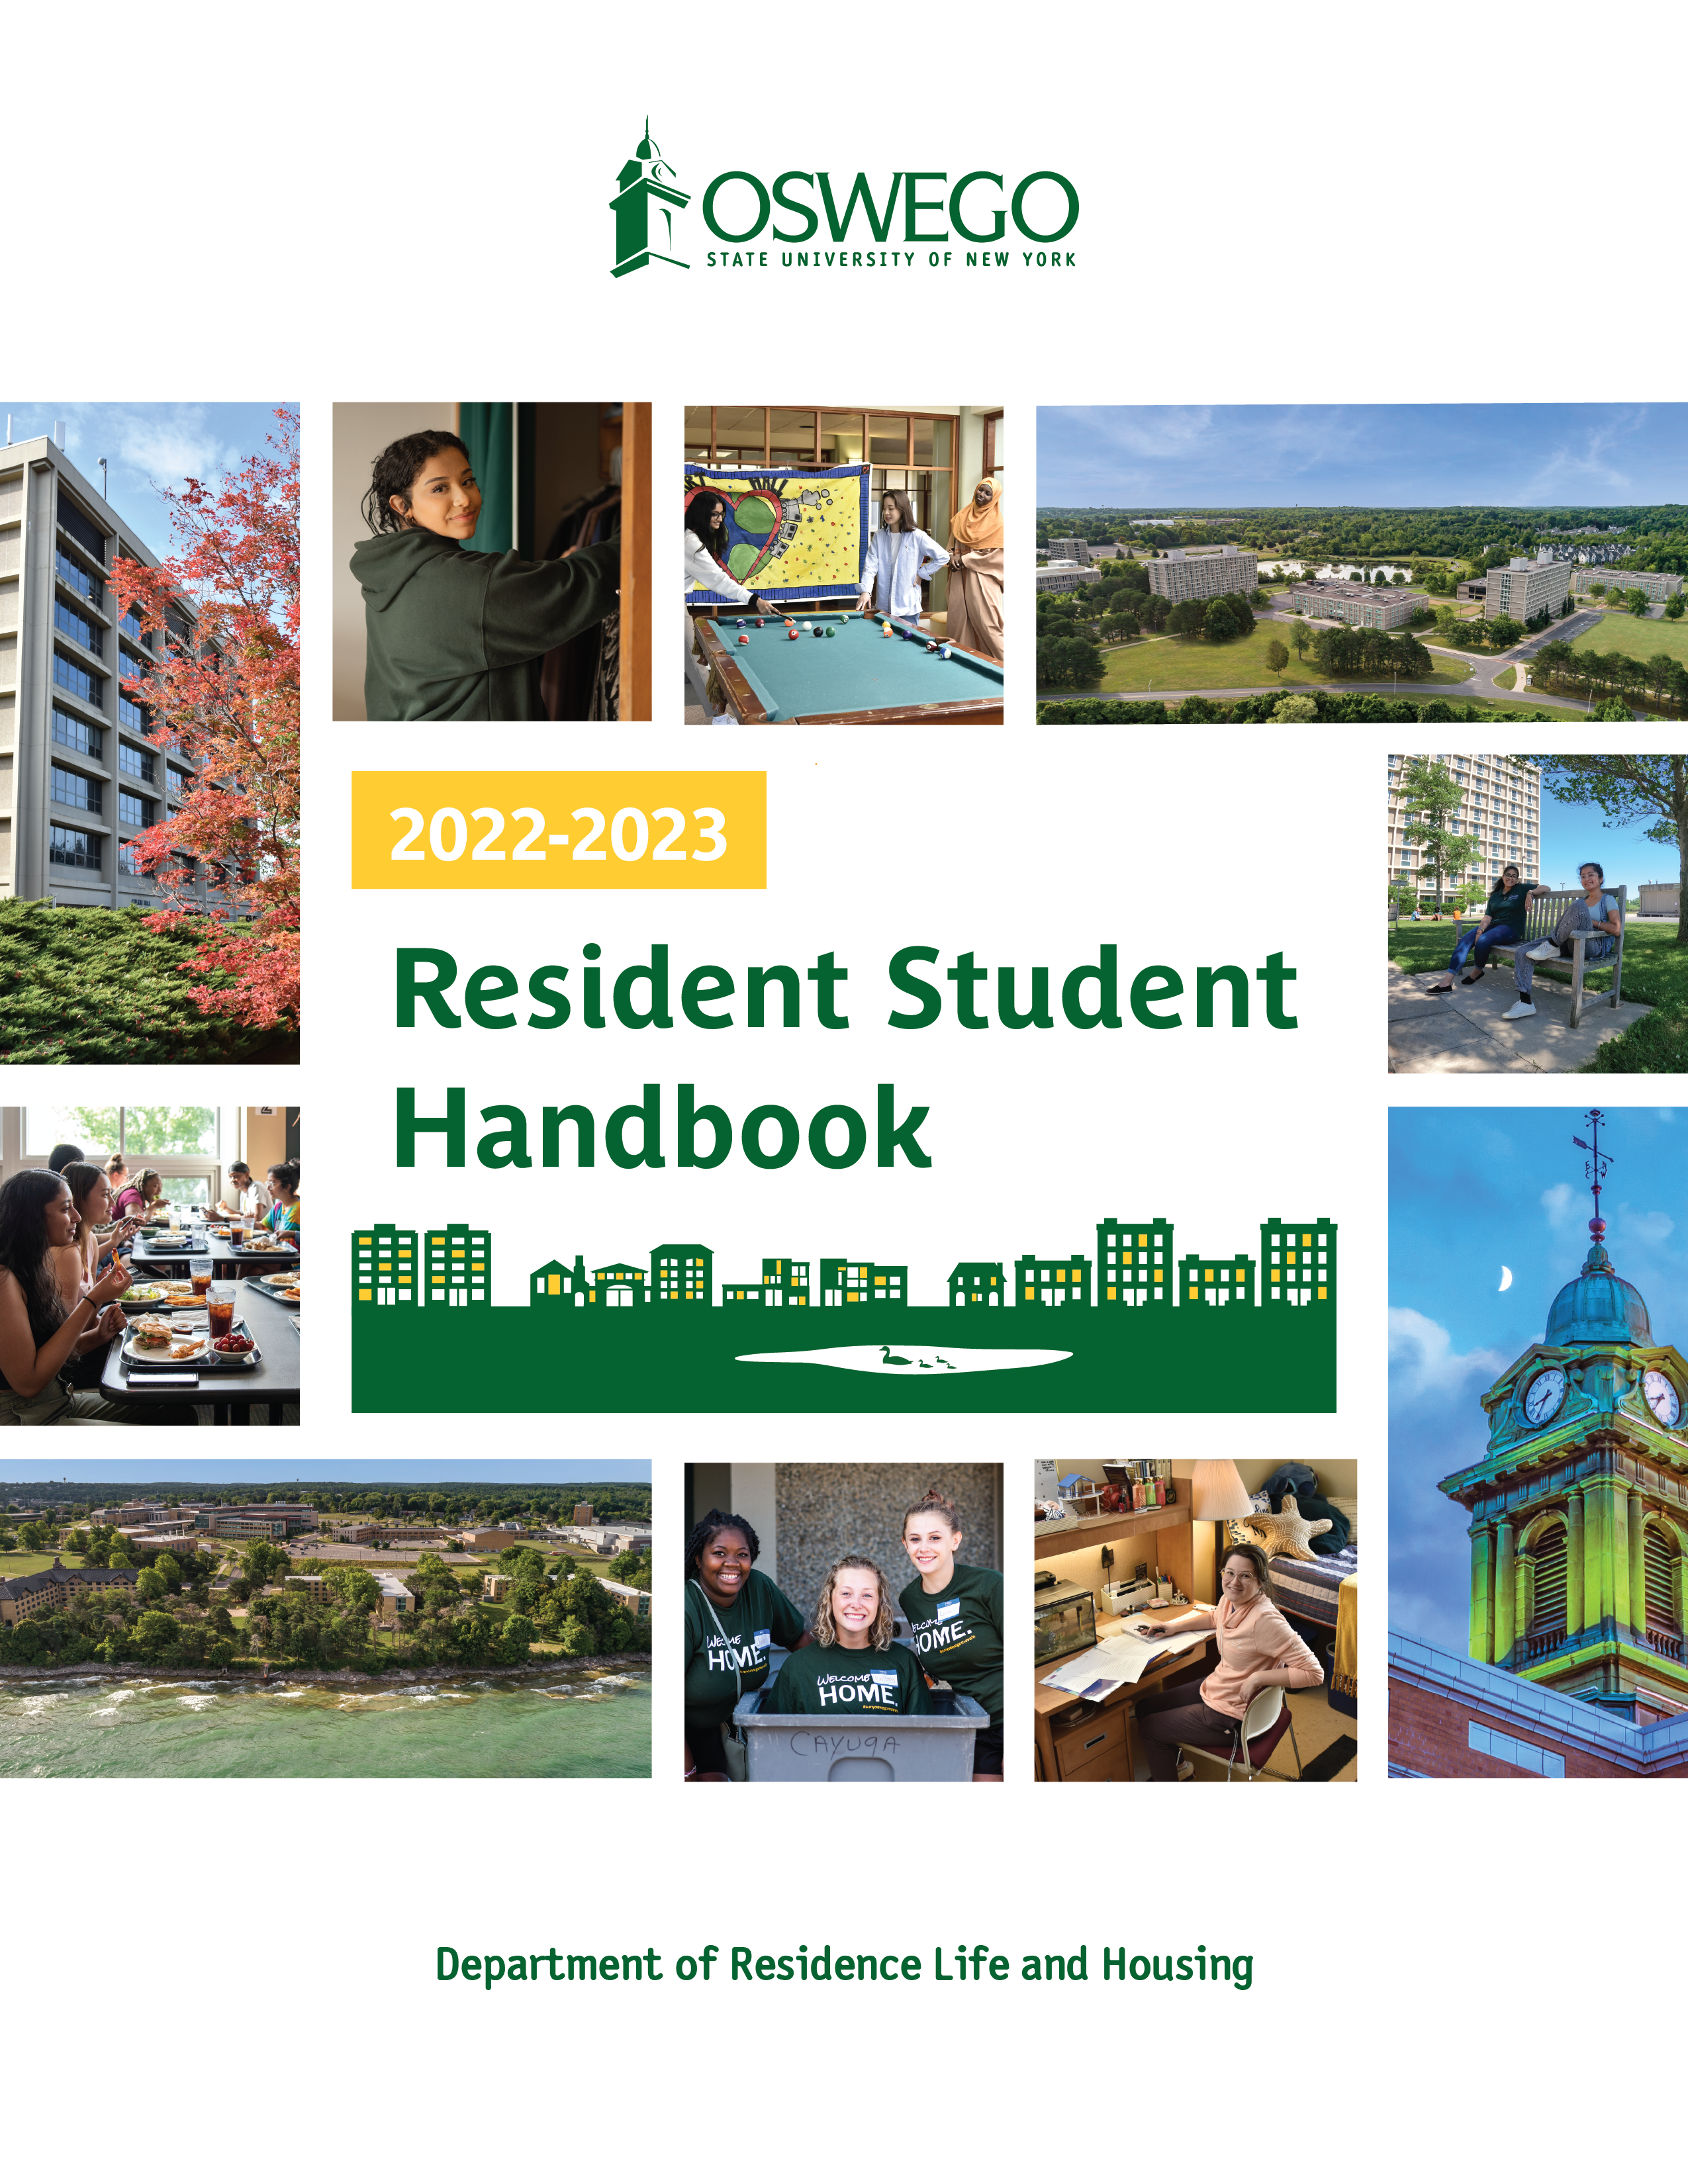 Cover of 2022-23 Resident Student Handbook - Title is surrounded by photos of resident students and of the residence halls